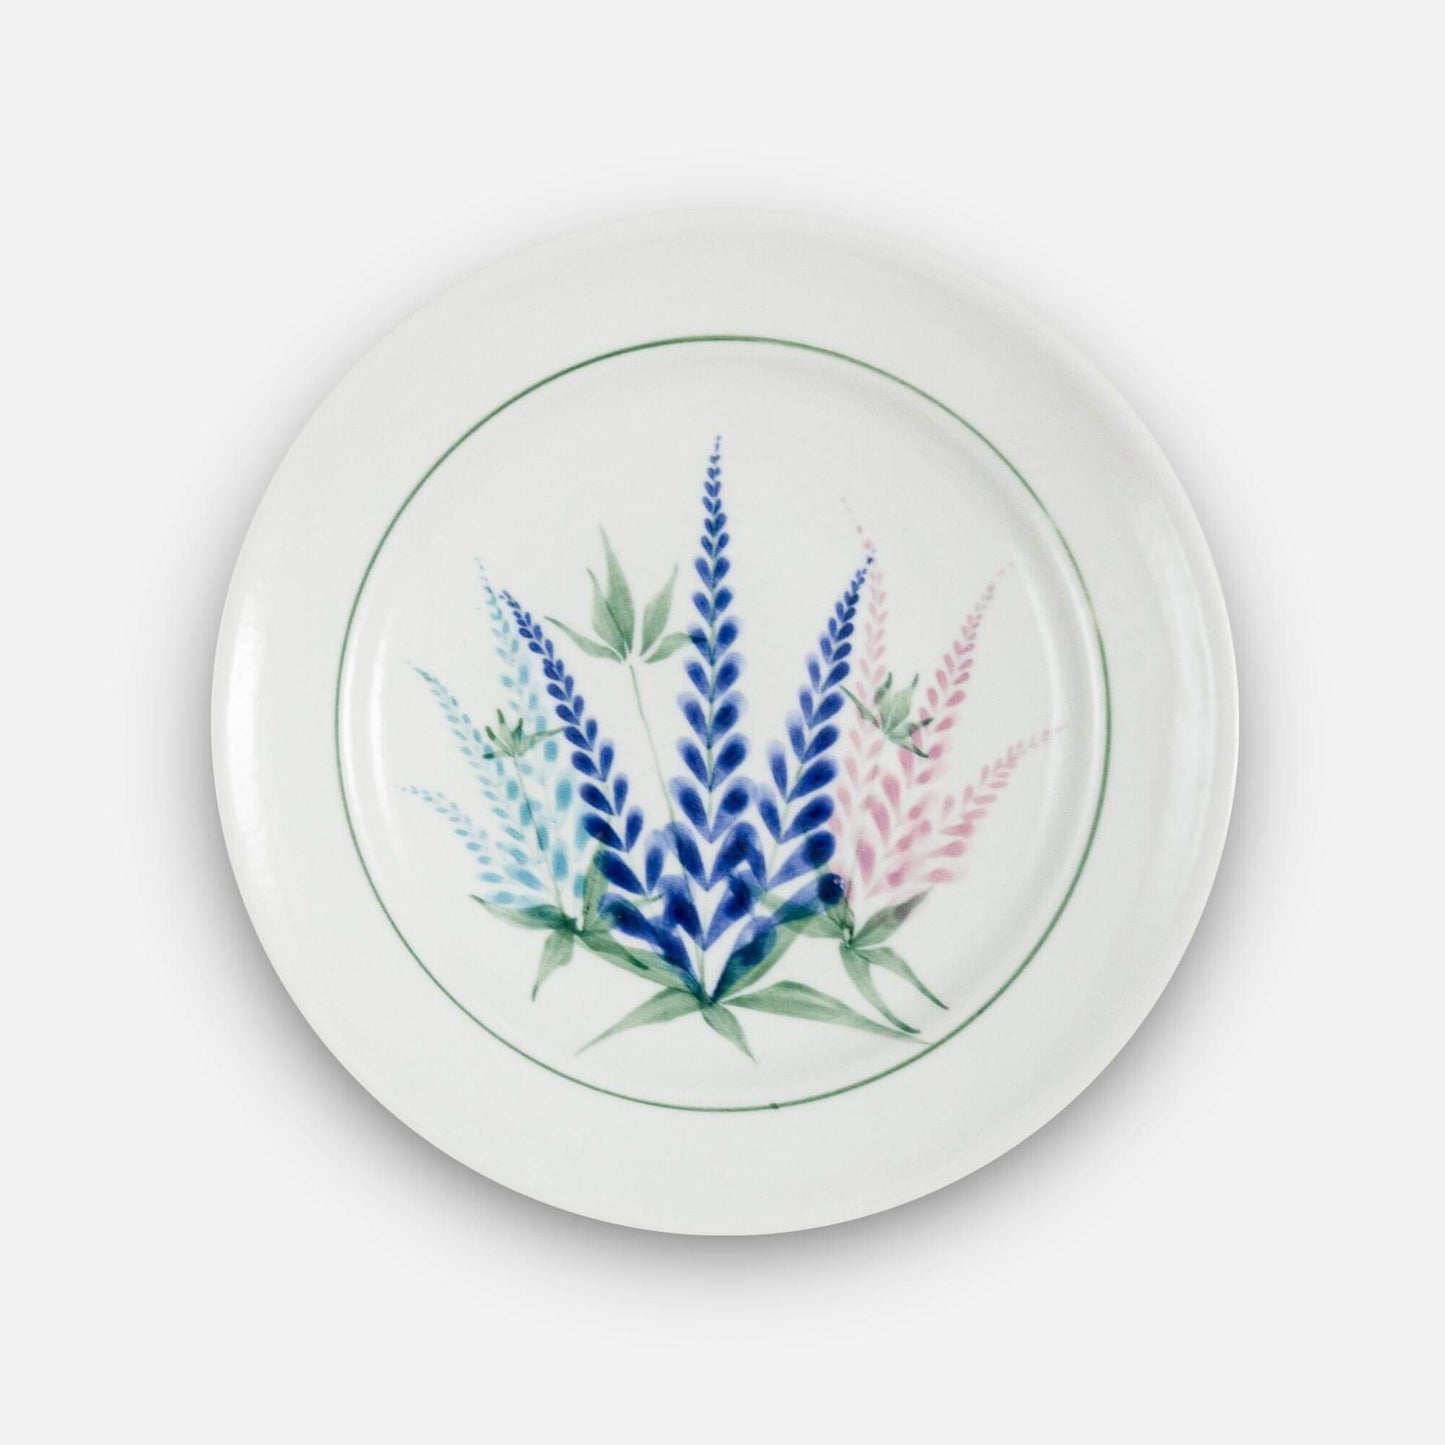 Handmade Pottery Footed Dinner Plate in Lupine pattern made by Georgetown Pottery in Maine